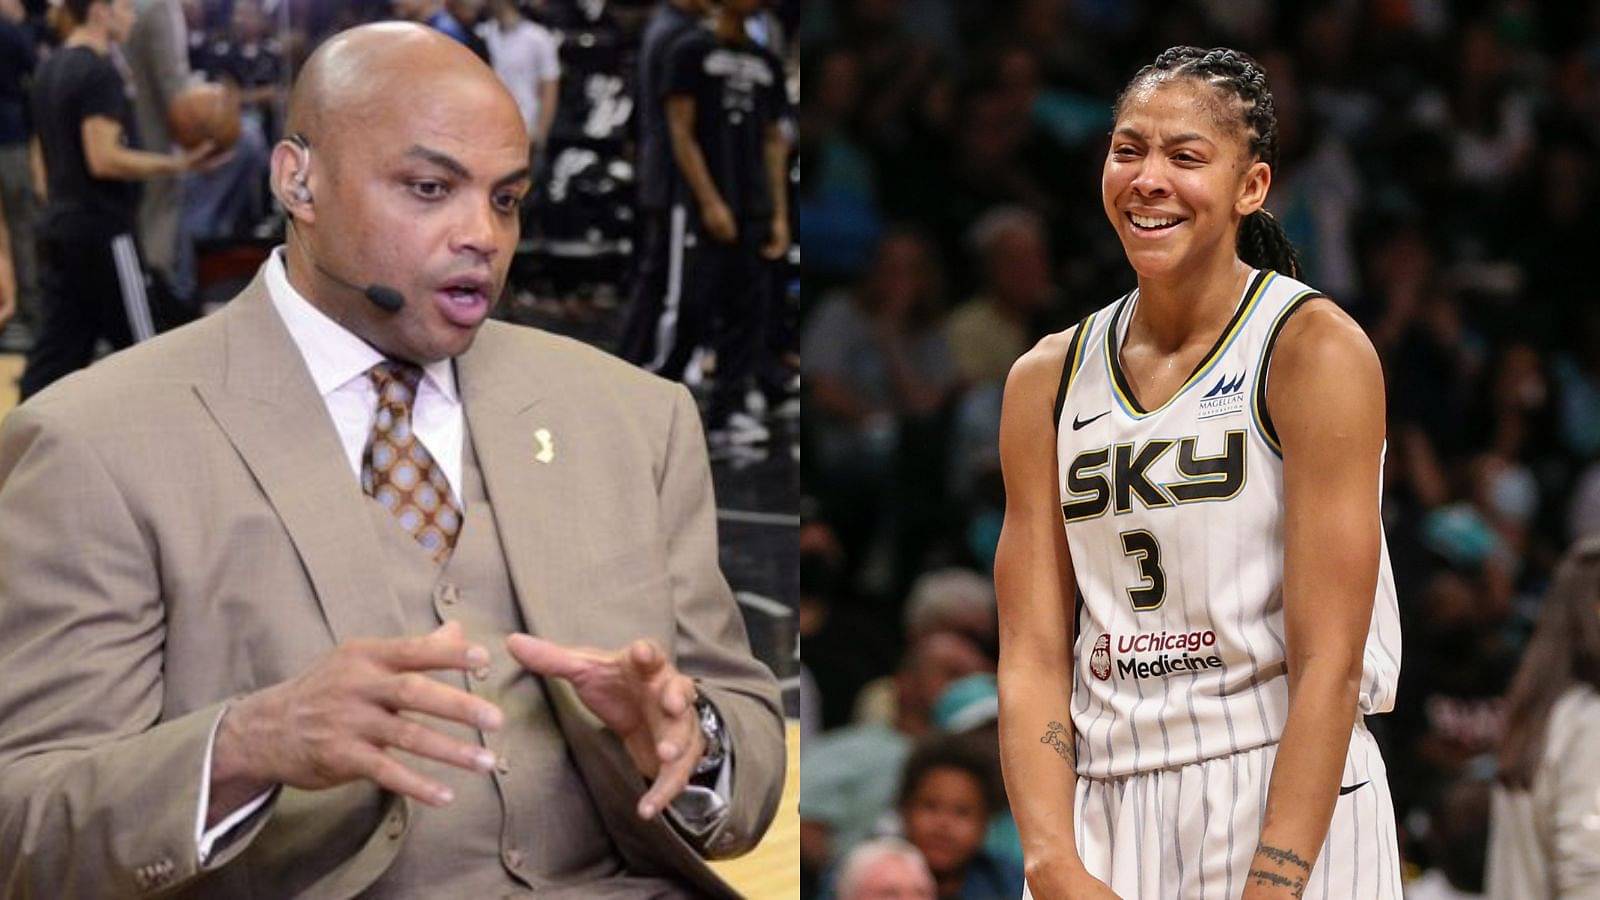 “Hey Candace Parker, You Almost Look As Good As I Do Baby”: When Charles Barkley tried to Shoot his Shot With 6ft 4’ WNBA Superstar